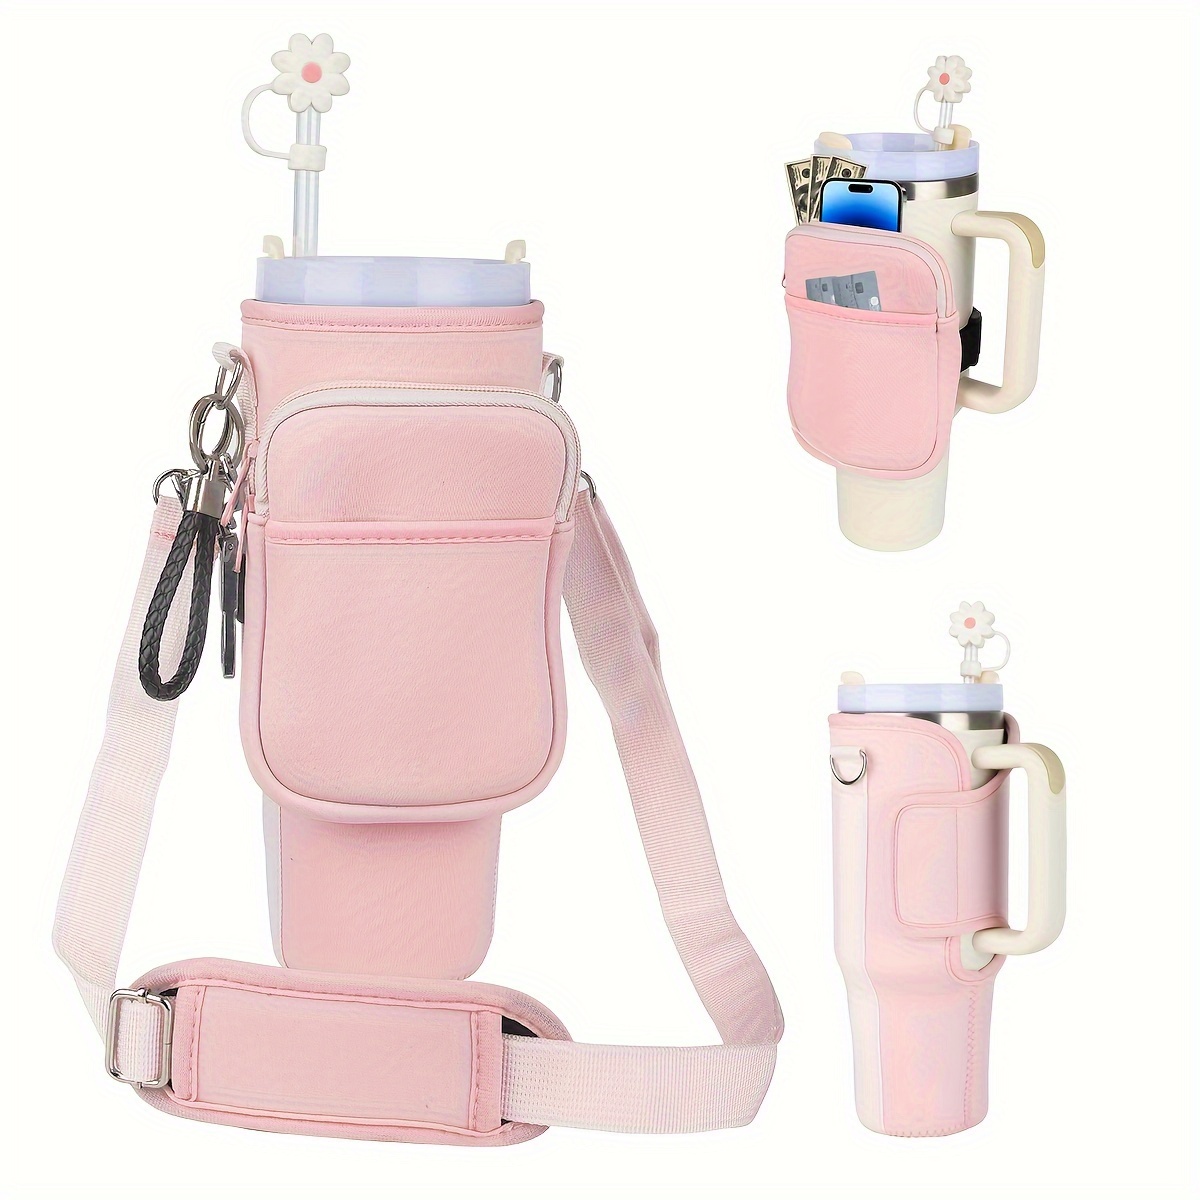 

Water Bottle Holder With Strap Compatible With Stanley Cup 40oz/simplem Morden 40oz Tumbler Hold, Water Bottle Carrier Bag With Adjustable Strap, Straw Cover & Carabiner For Hiking Camping